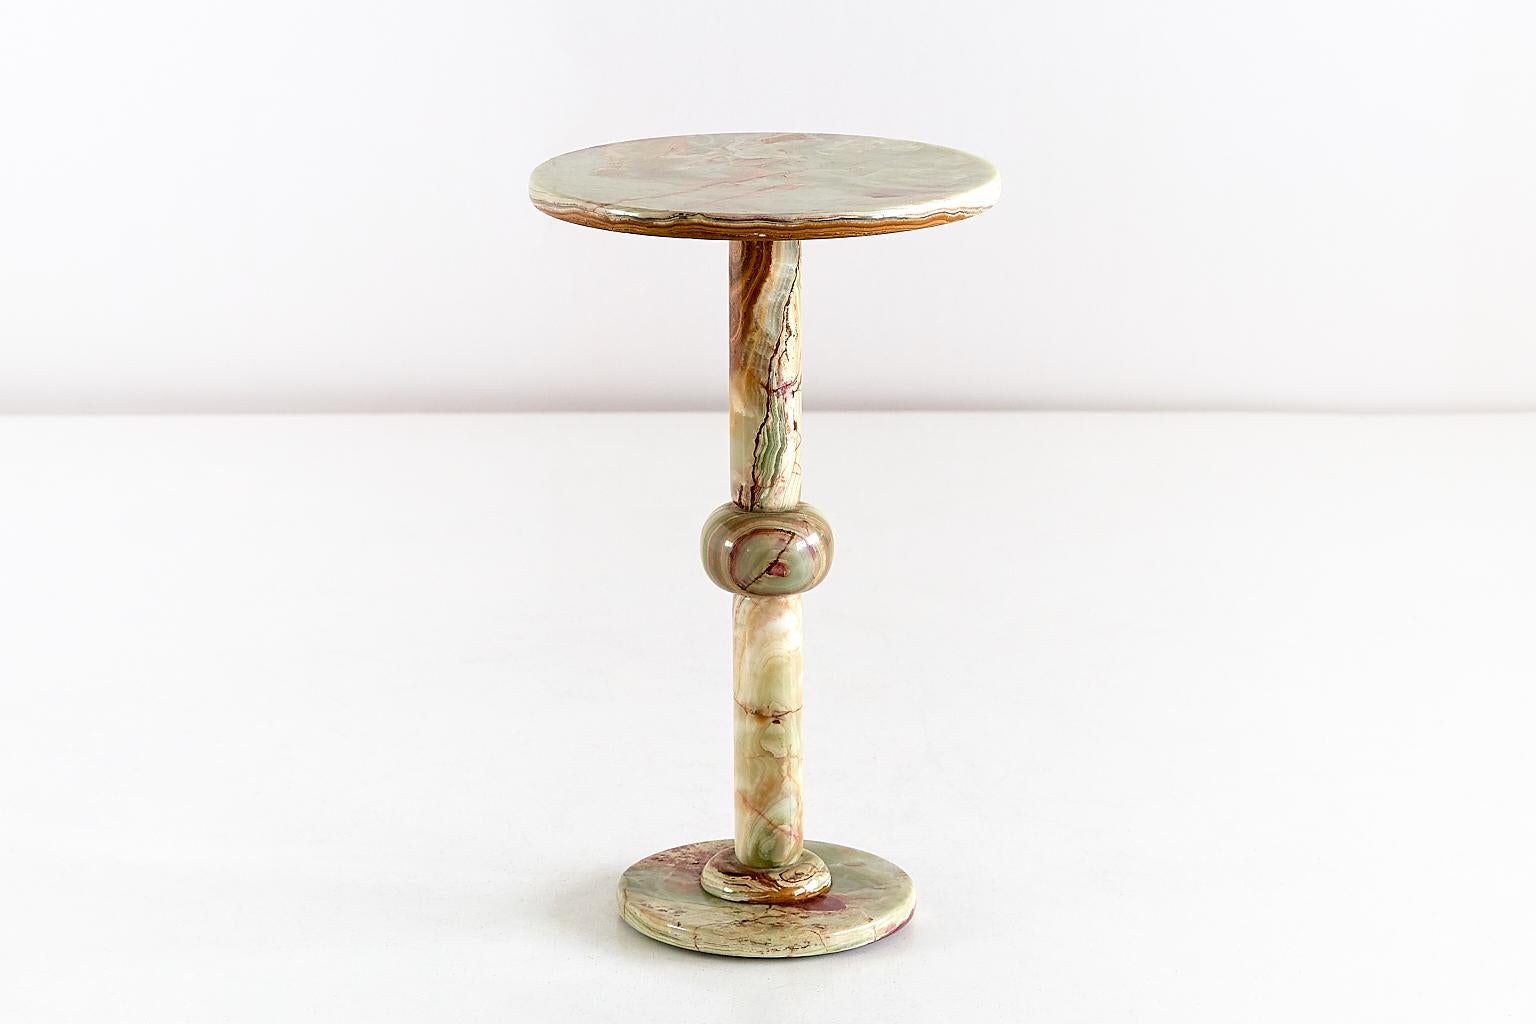 This elegant side table was produced in Italy in the 1960s. The pedestal base and top are all made of multicolored onyx. The different hues and intensitities of red, white and green give the table a refined and striking appearance.